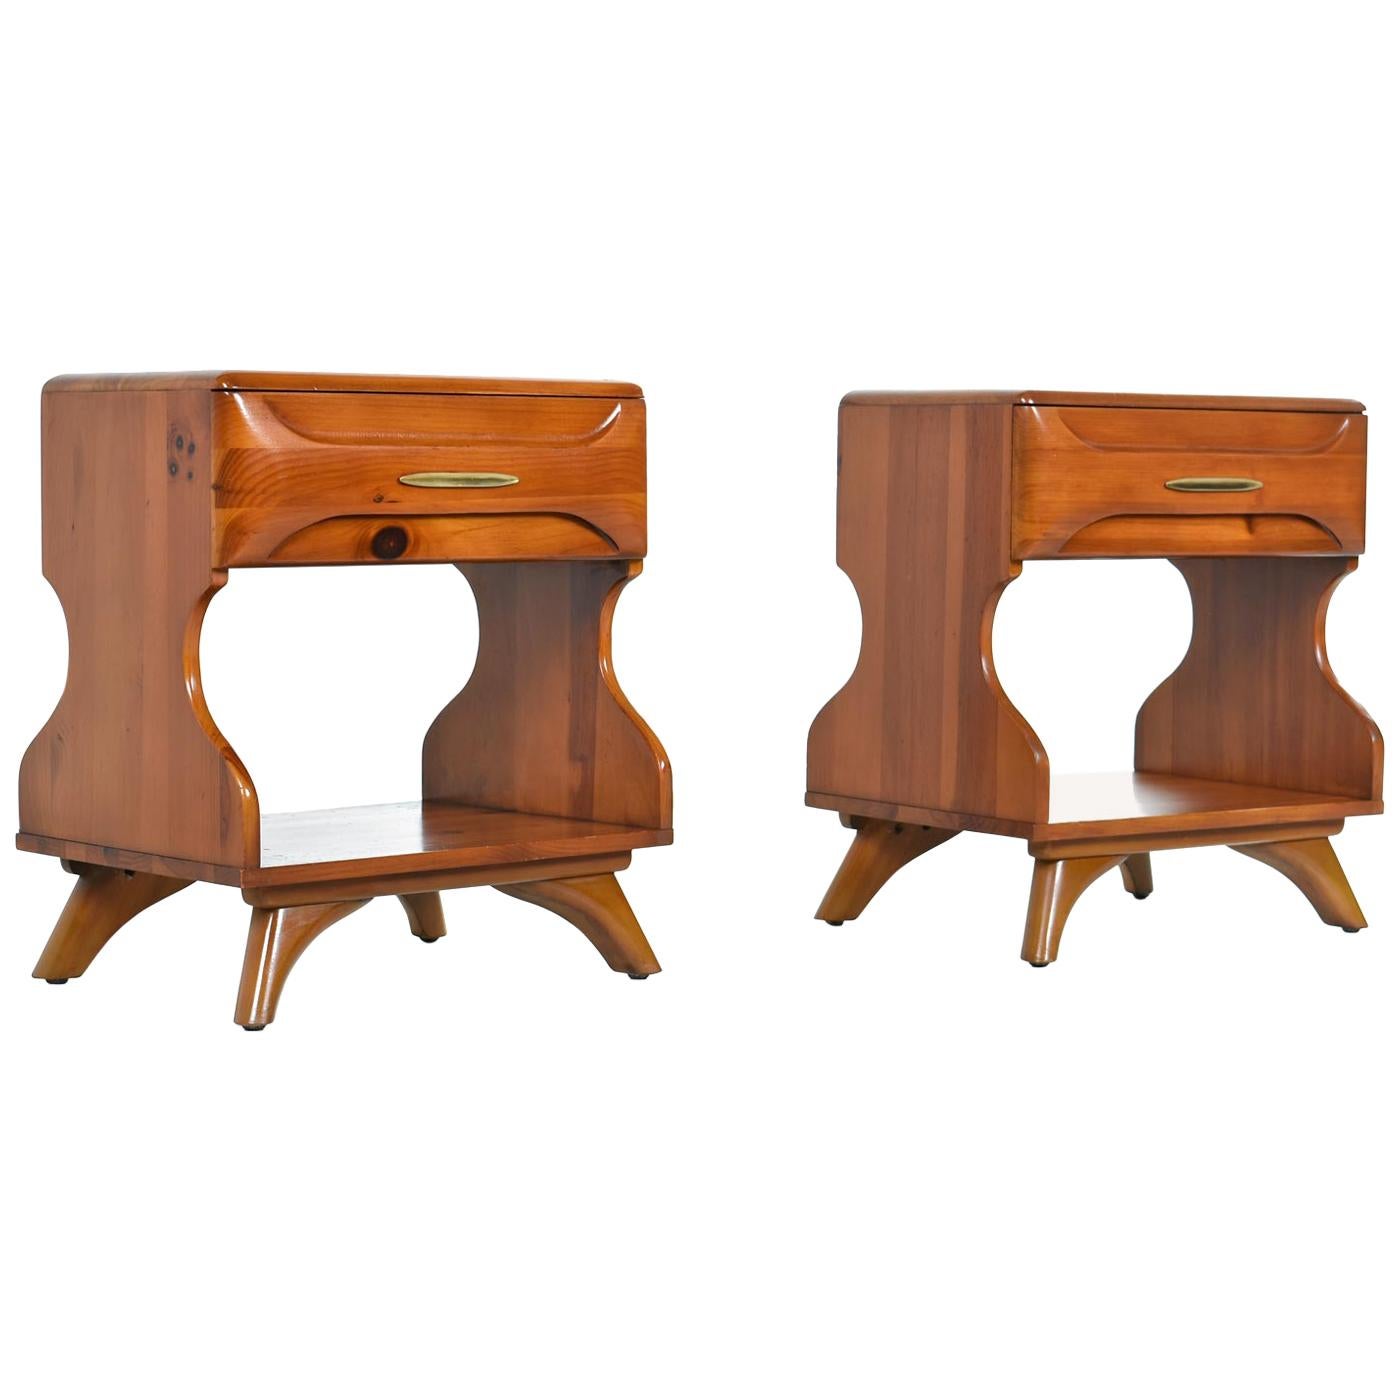 Vintage 1950s sculptured pine nightstands by Franklin Shockey. Lovely blend of Mid-Century Modern, Atomic age design blended with rustic Adirondack look. It's like a mix of Lincoln Logs and Danish modern. Both nightstands have been completely